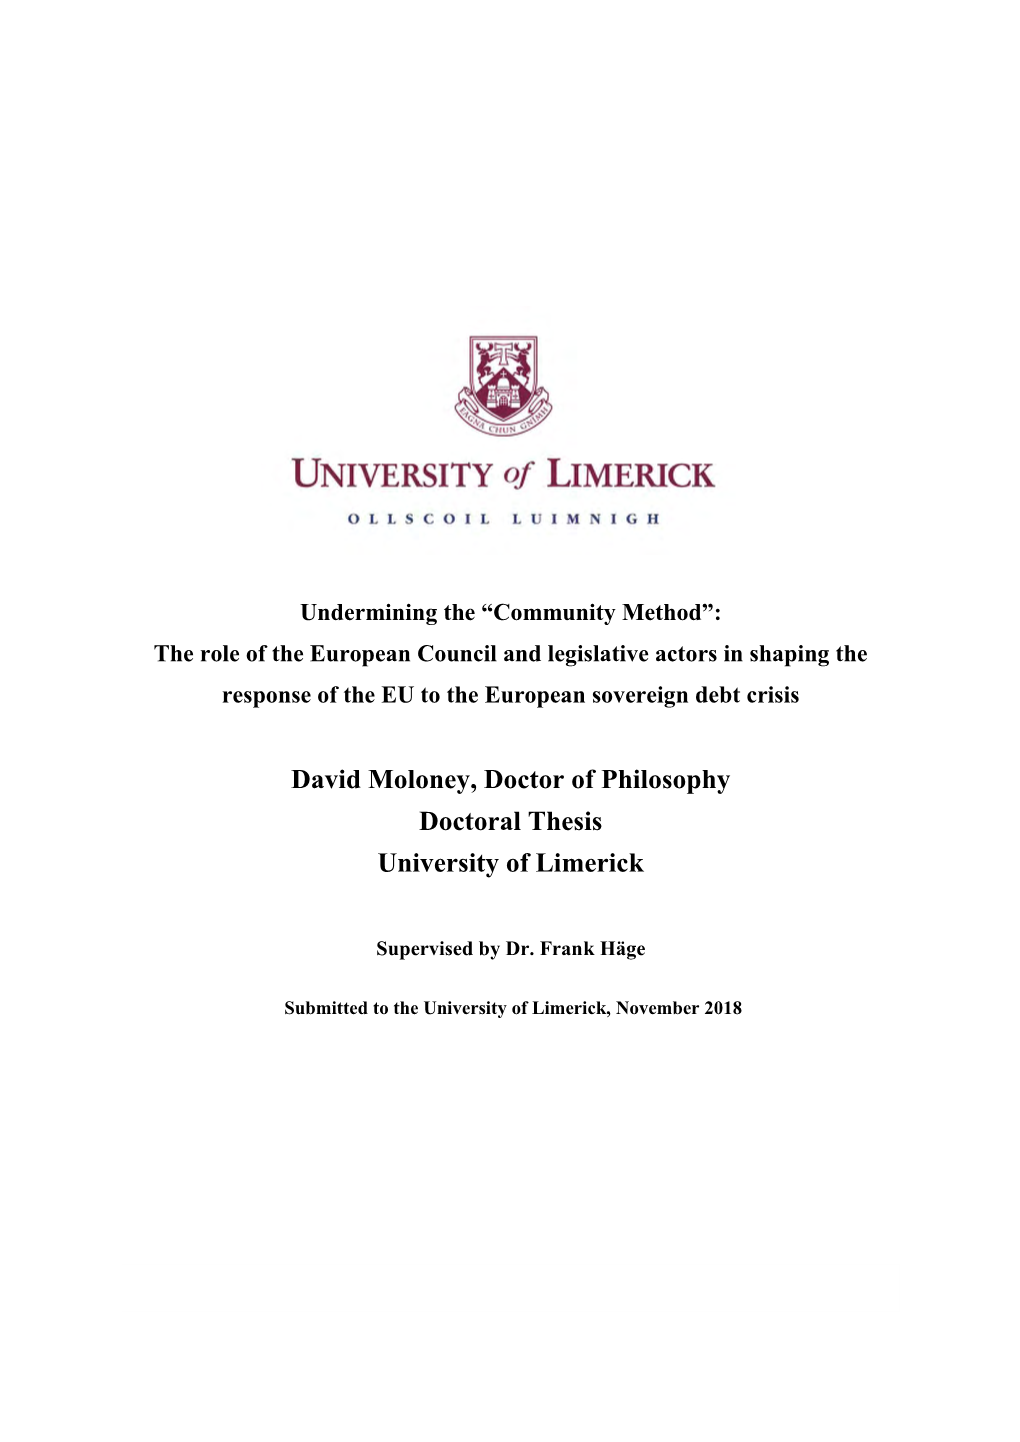 David Moloney, Doctor of Philosophy Doctoral Thesis University of Limerick